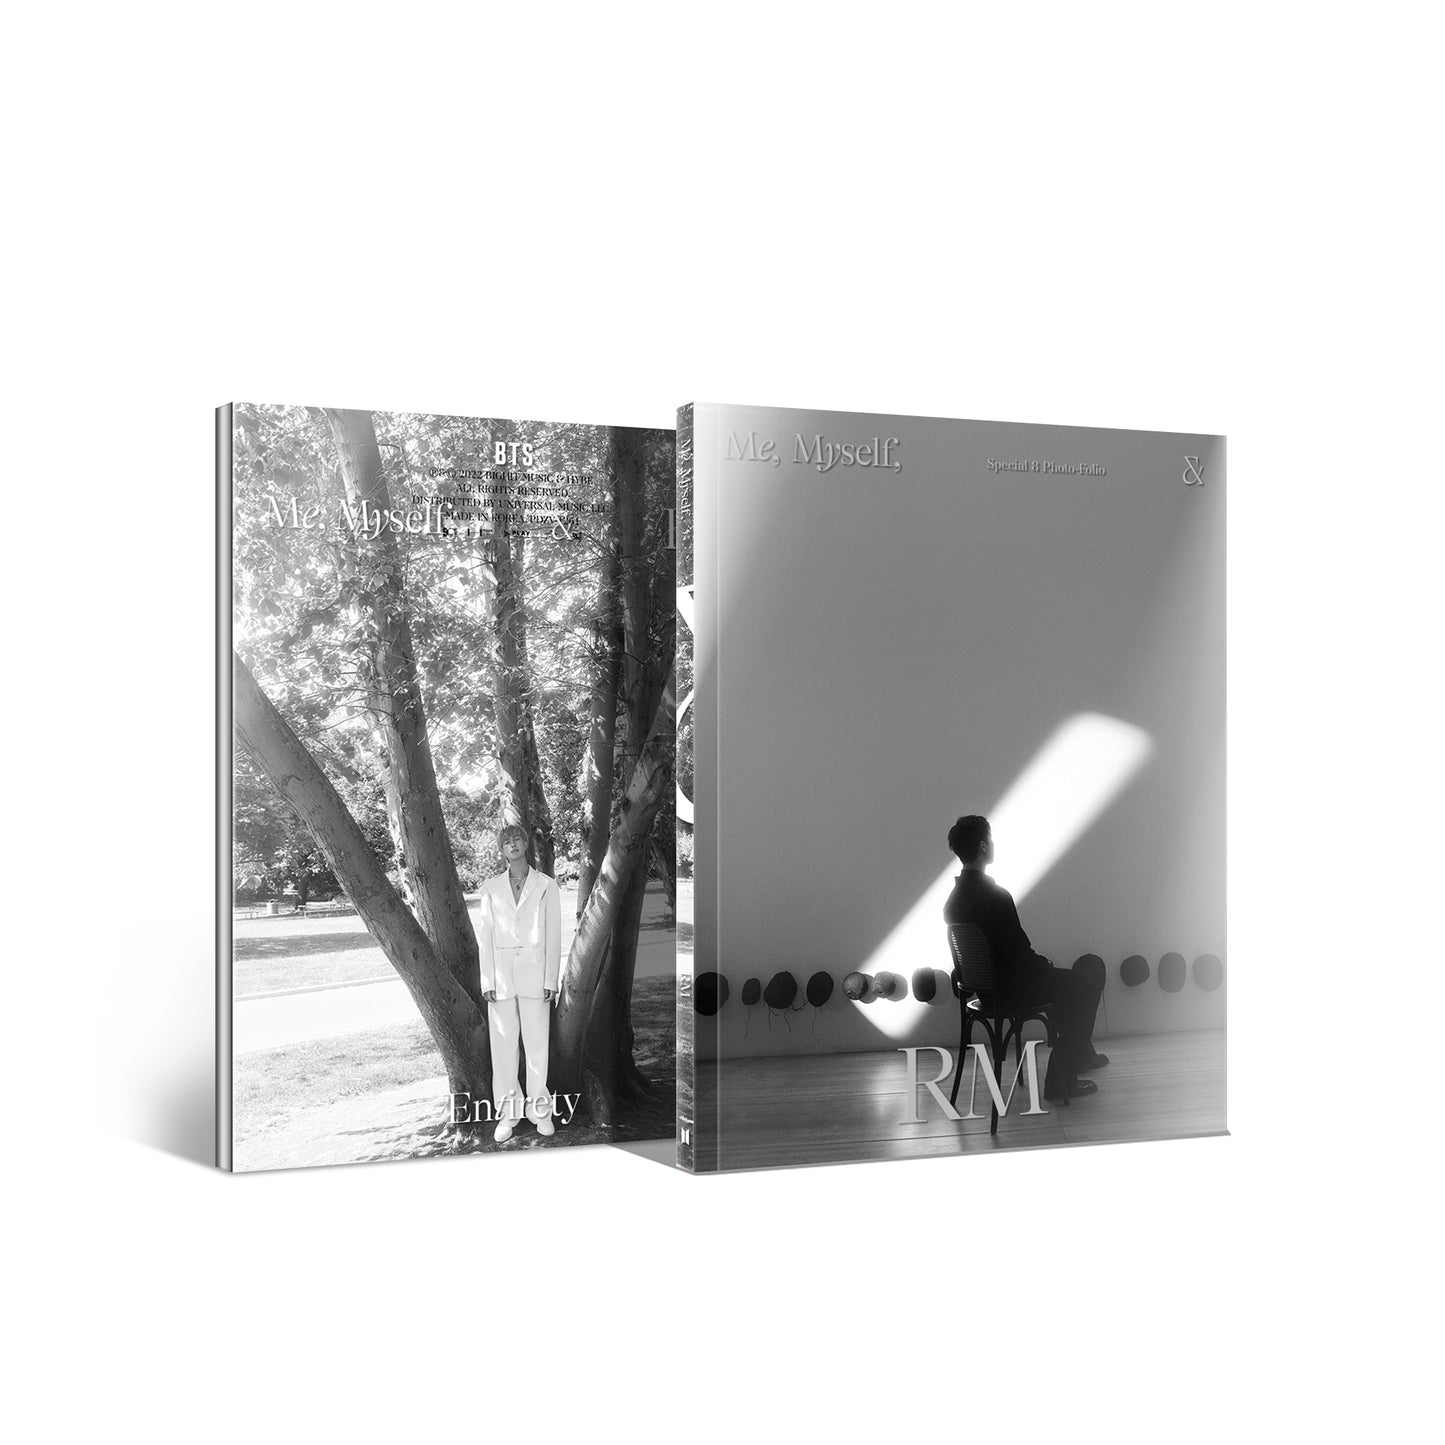 BTS - Special 8 Photo-Folio - Me, Myself, and RM: [Entirety]